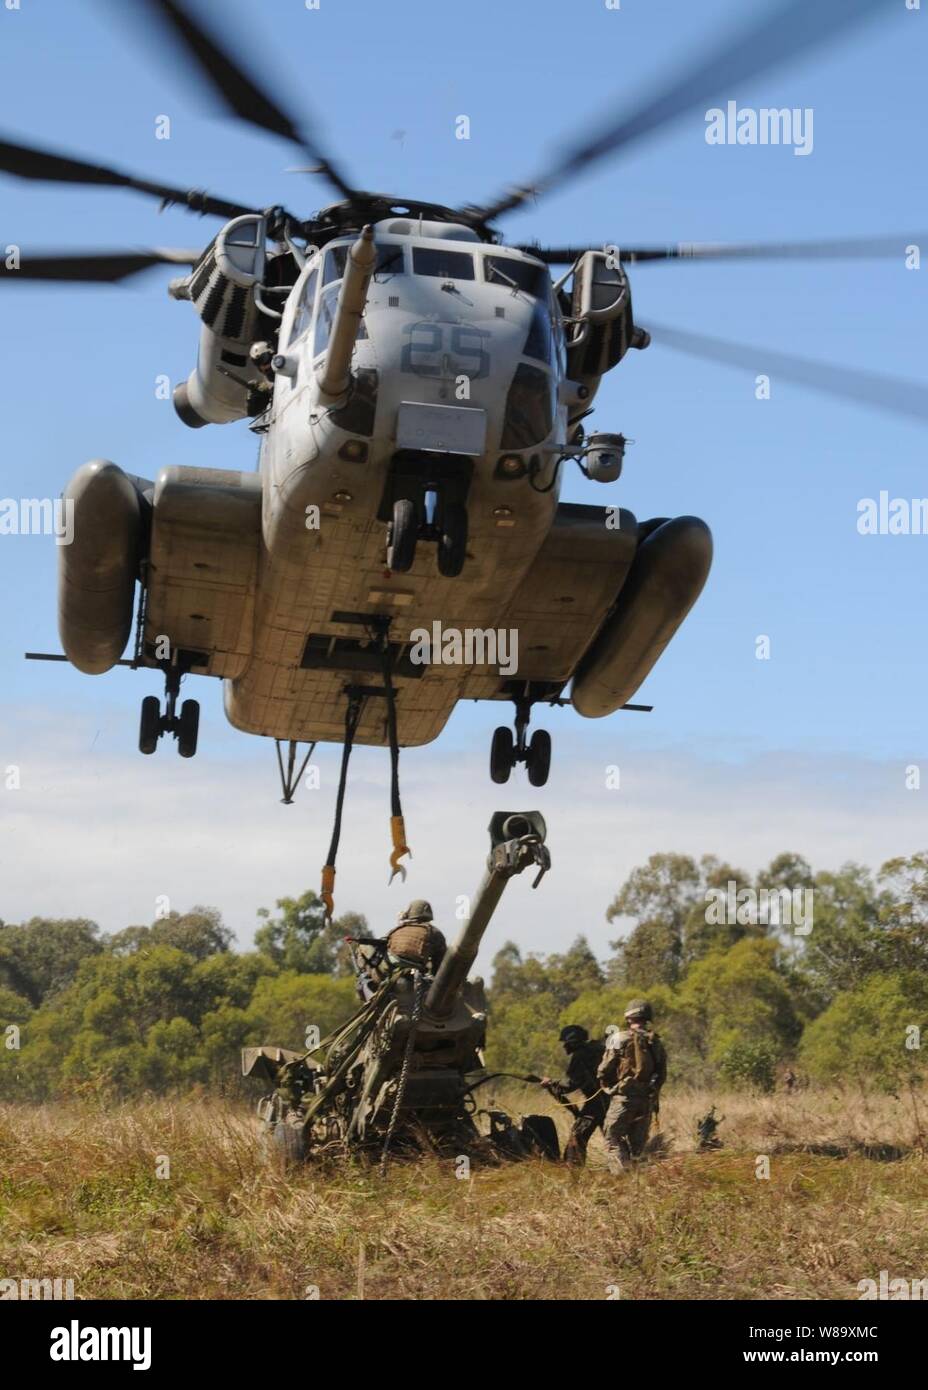 A U.S. Marine Corps MH-53E Sea Stallion helicopter, assigned to the Air Combat Element of the 31st Marine Expeditionary Unit, embarked aboard the forward-deployed amphibious assault ship USS Essex (LHD 2), prepares to lift an M777 155mm lightweight howitzer in Shoalwater Bay, Australia, as part of Talisman Sabre 2009 on July 19, 2009.  Talisman Sabre is a combined training exercise designed to train Australian and U.S. forces in planning and conducting combined operations, which will help improve combat readiness and interoperability. Stock Photo